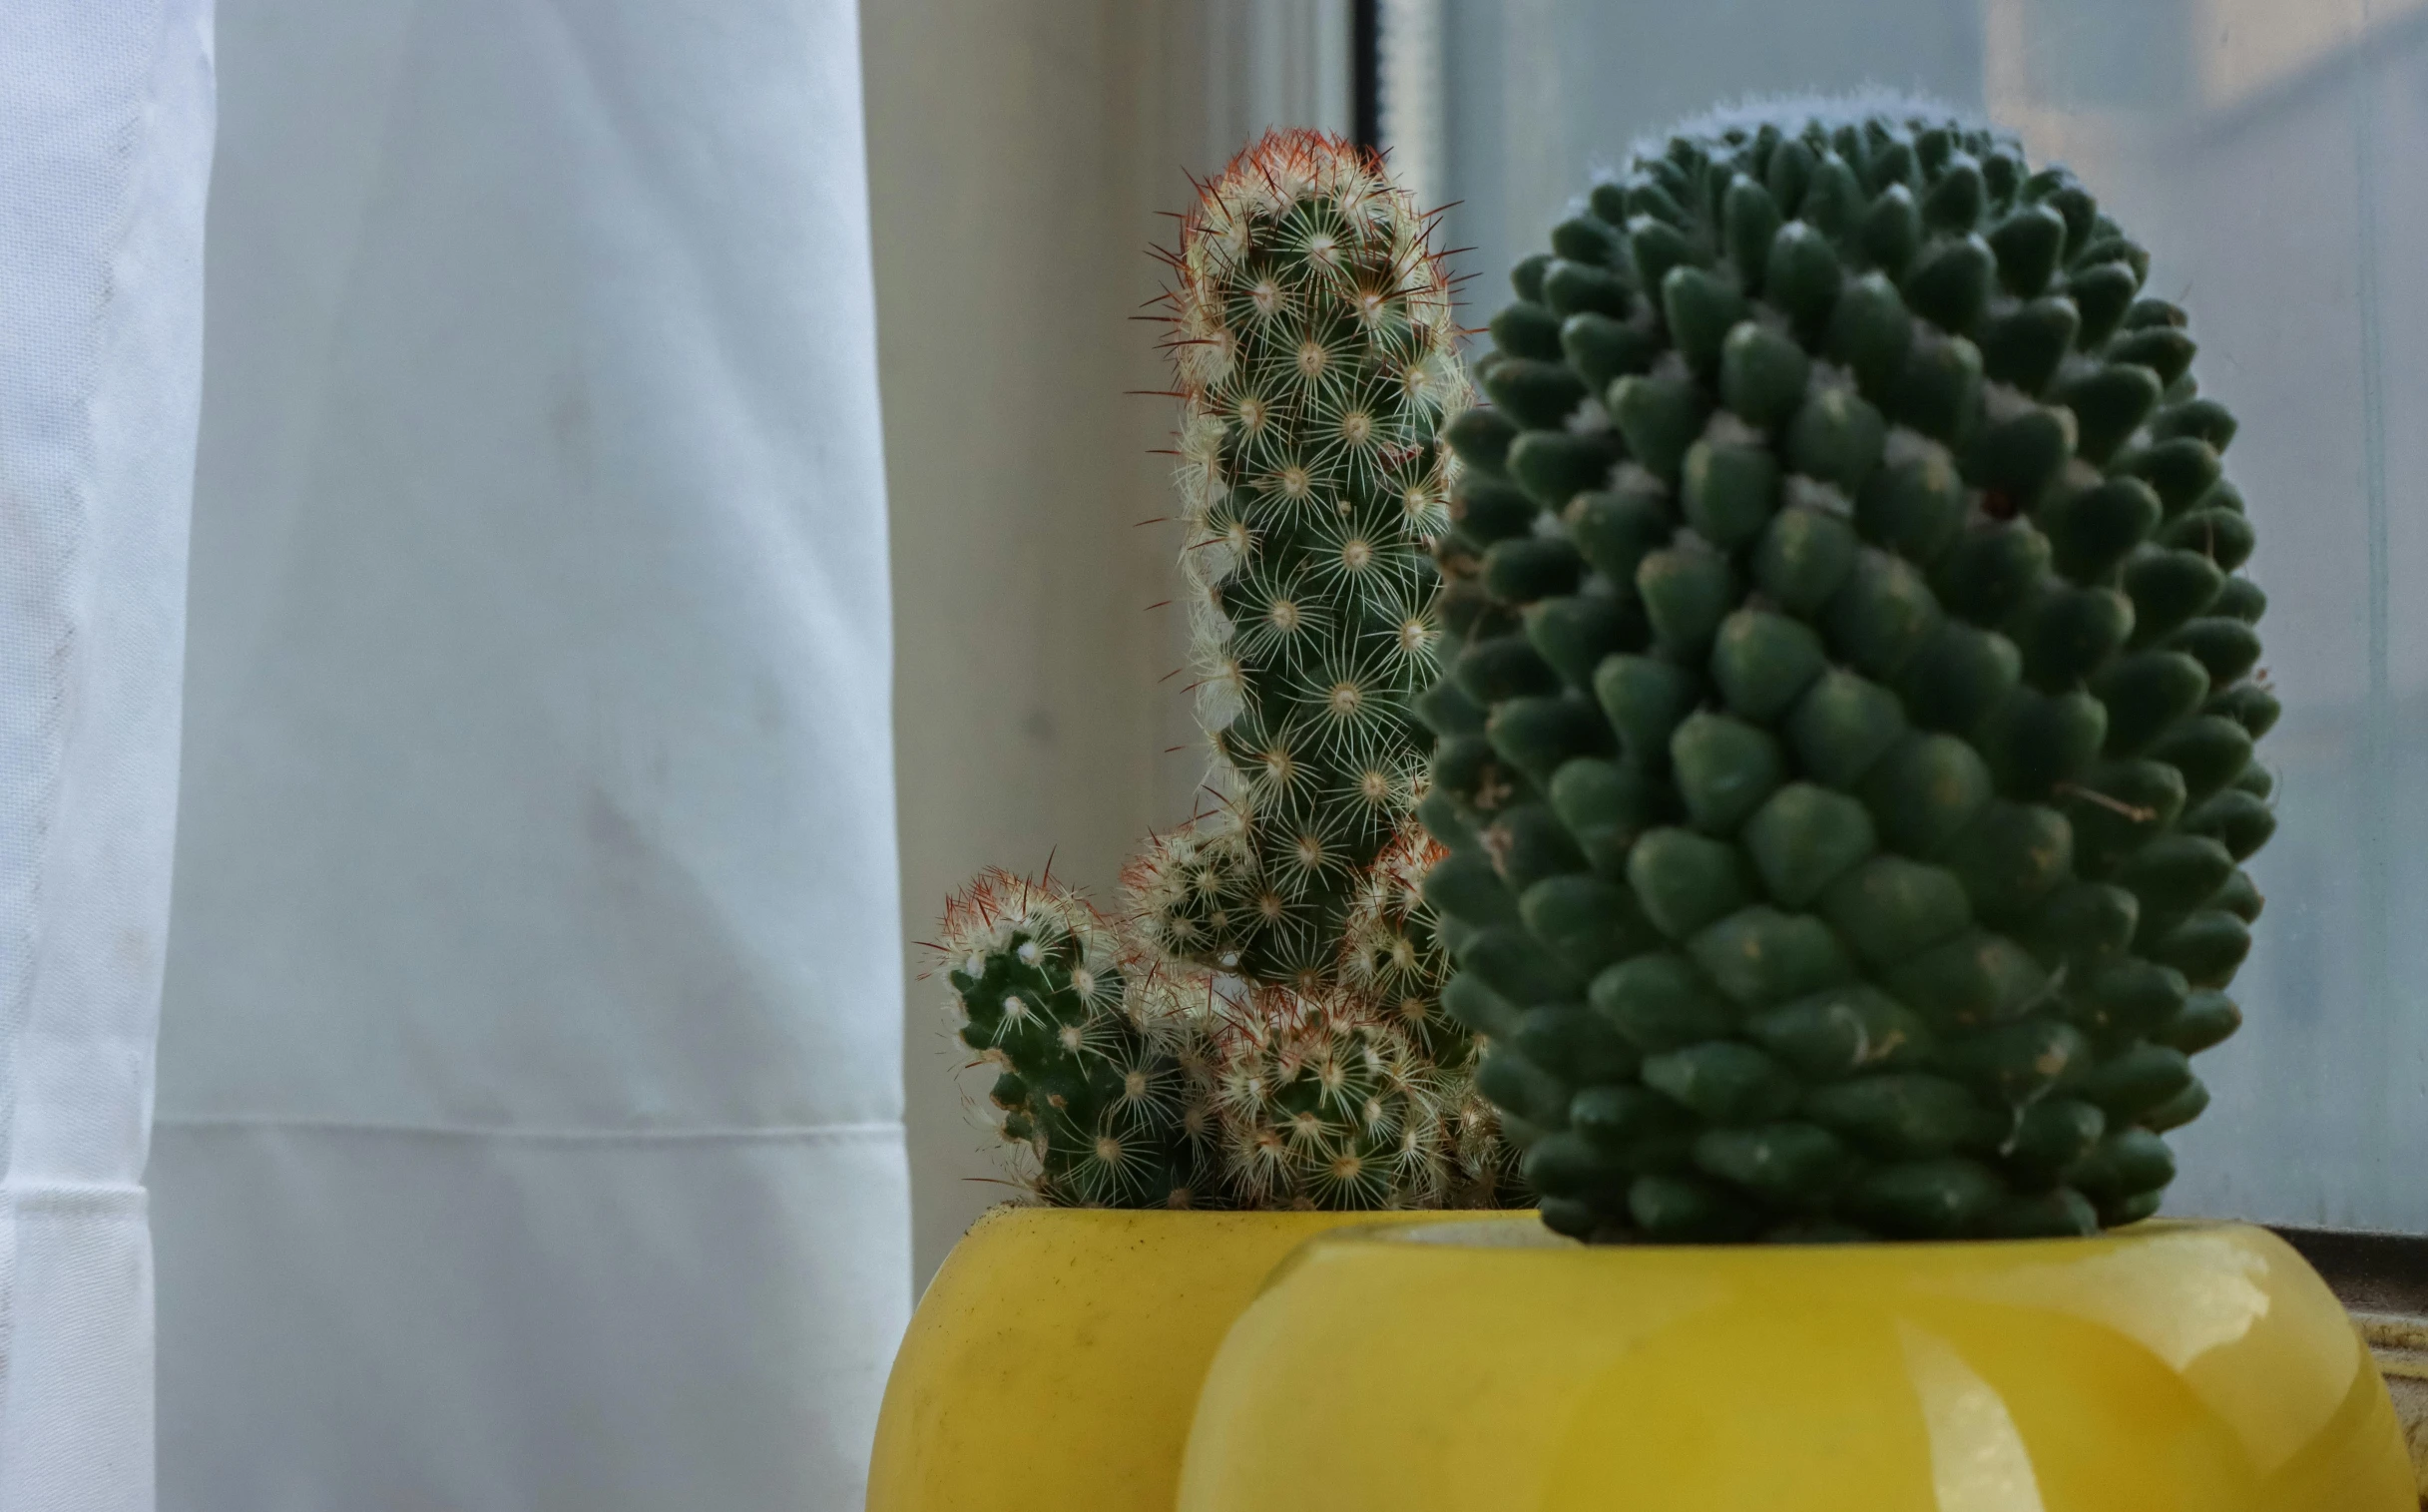 an image of a cactus sitting next to another plant